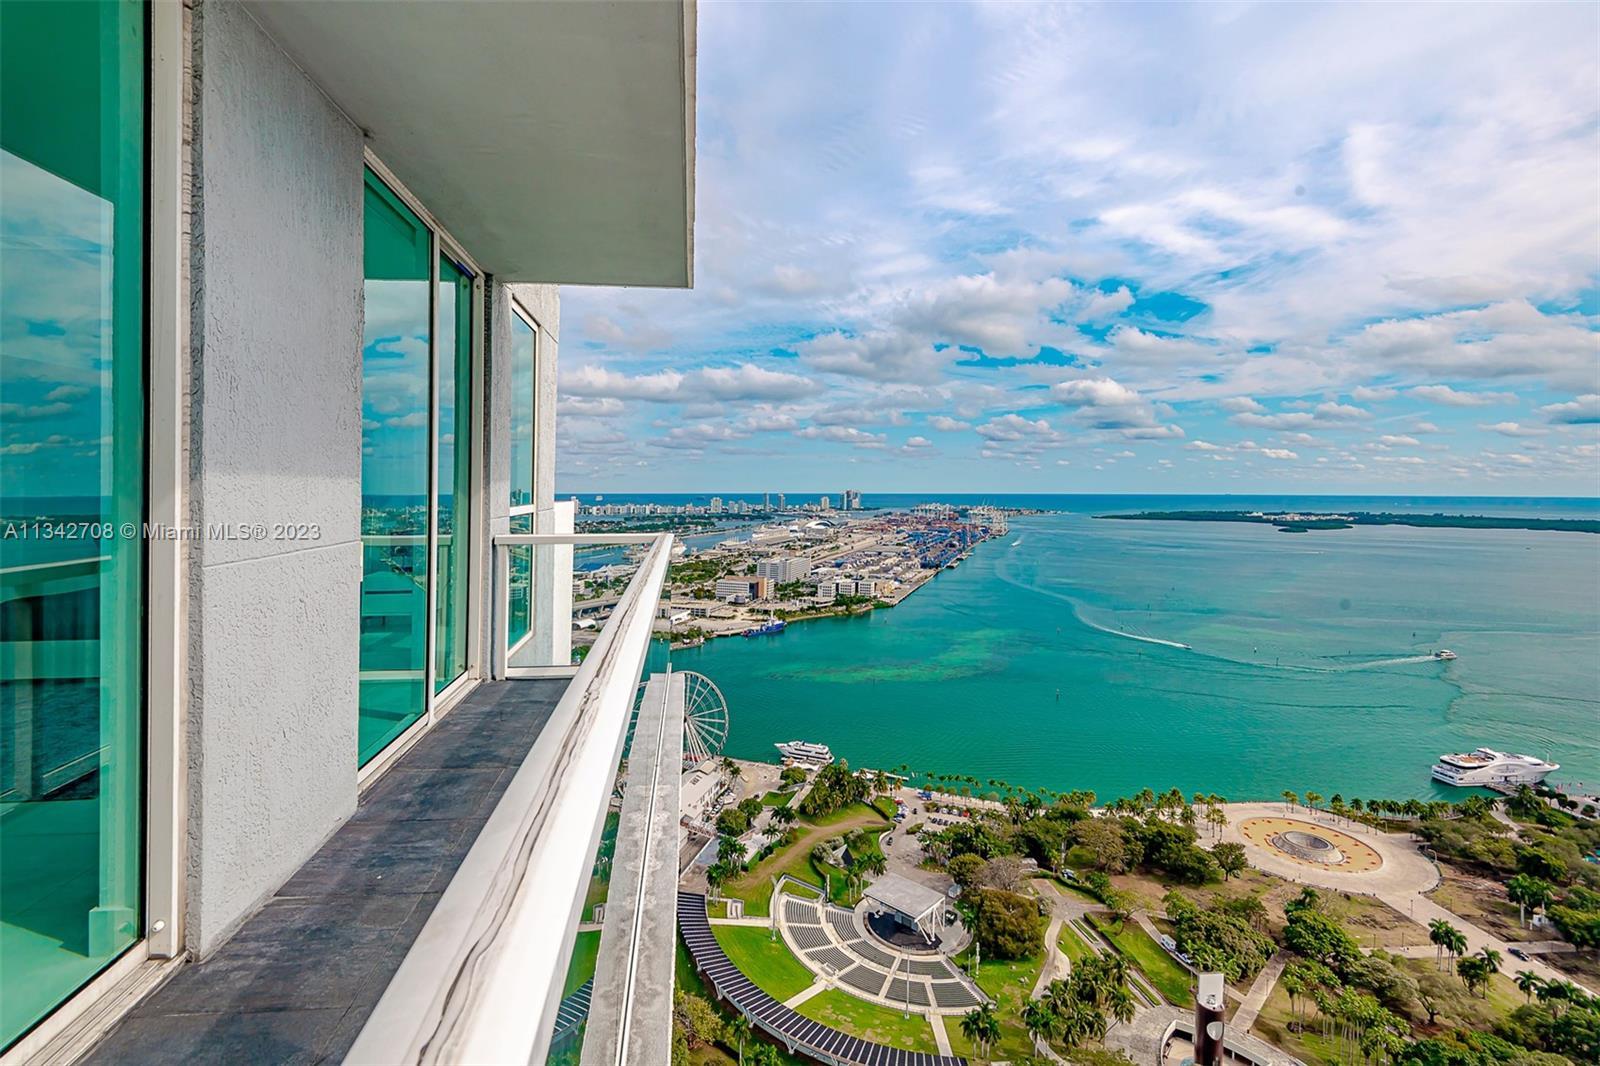 Opulent 3 bed/4.5 bath three story Upper Penthouse with miles of wide open bay, ocean and city views